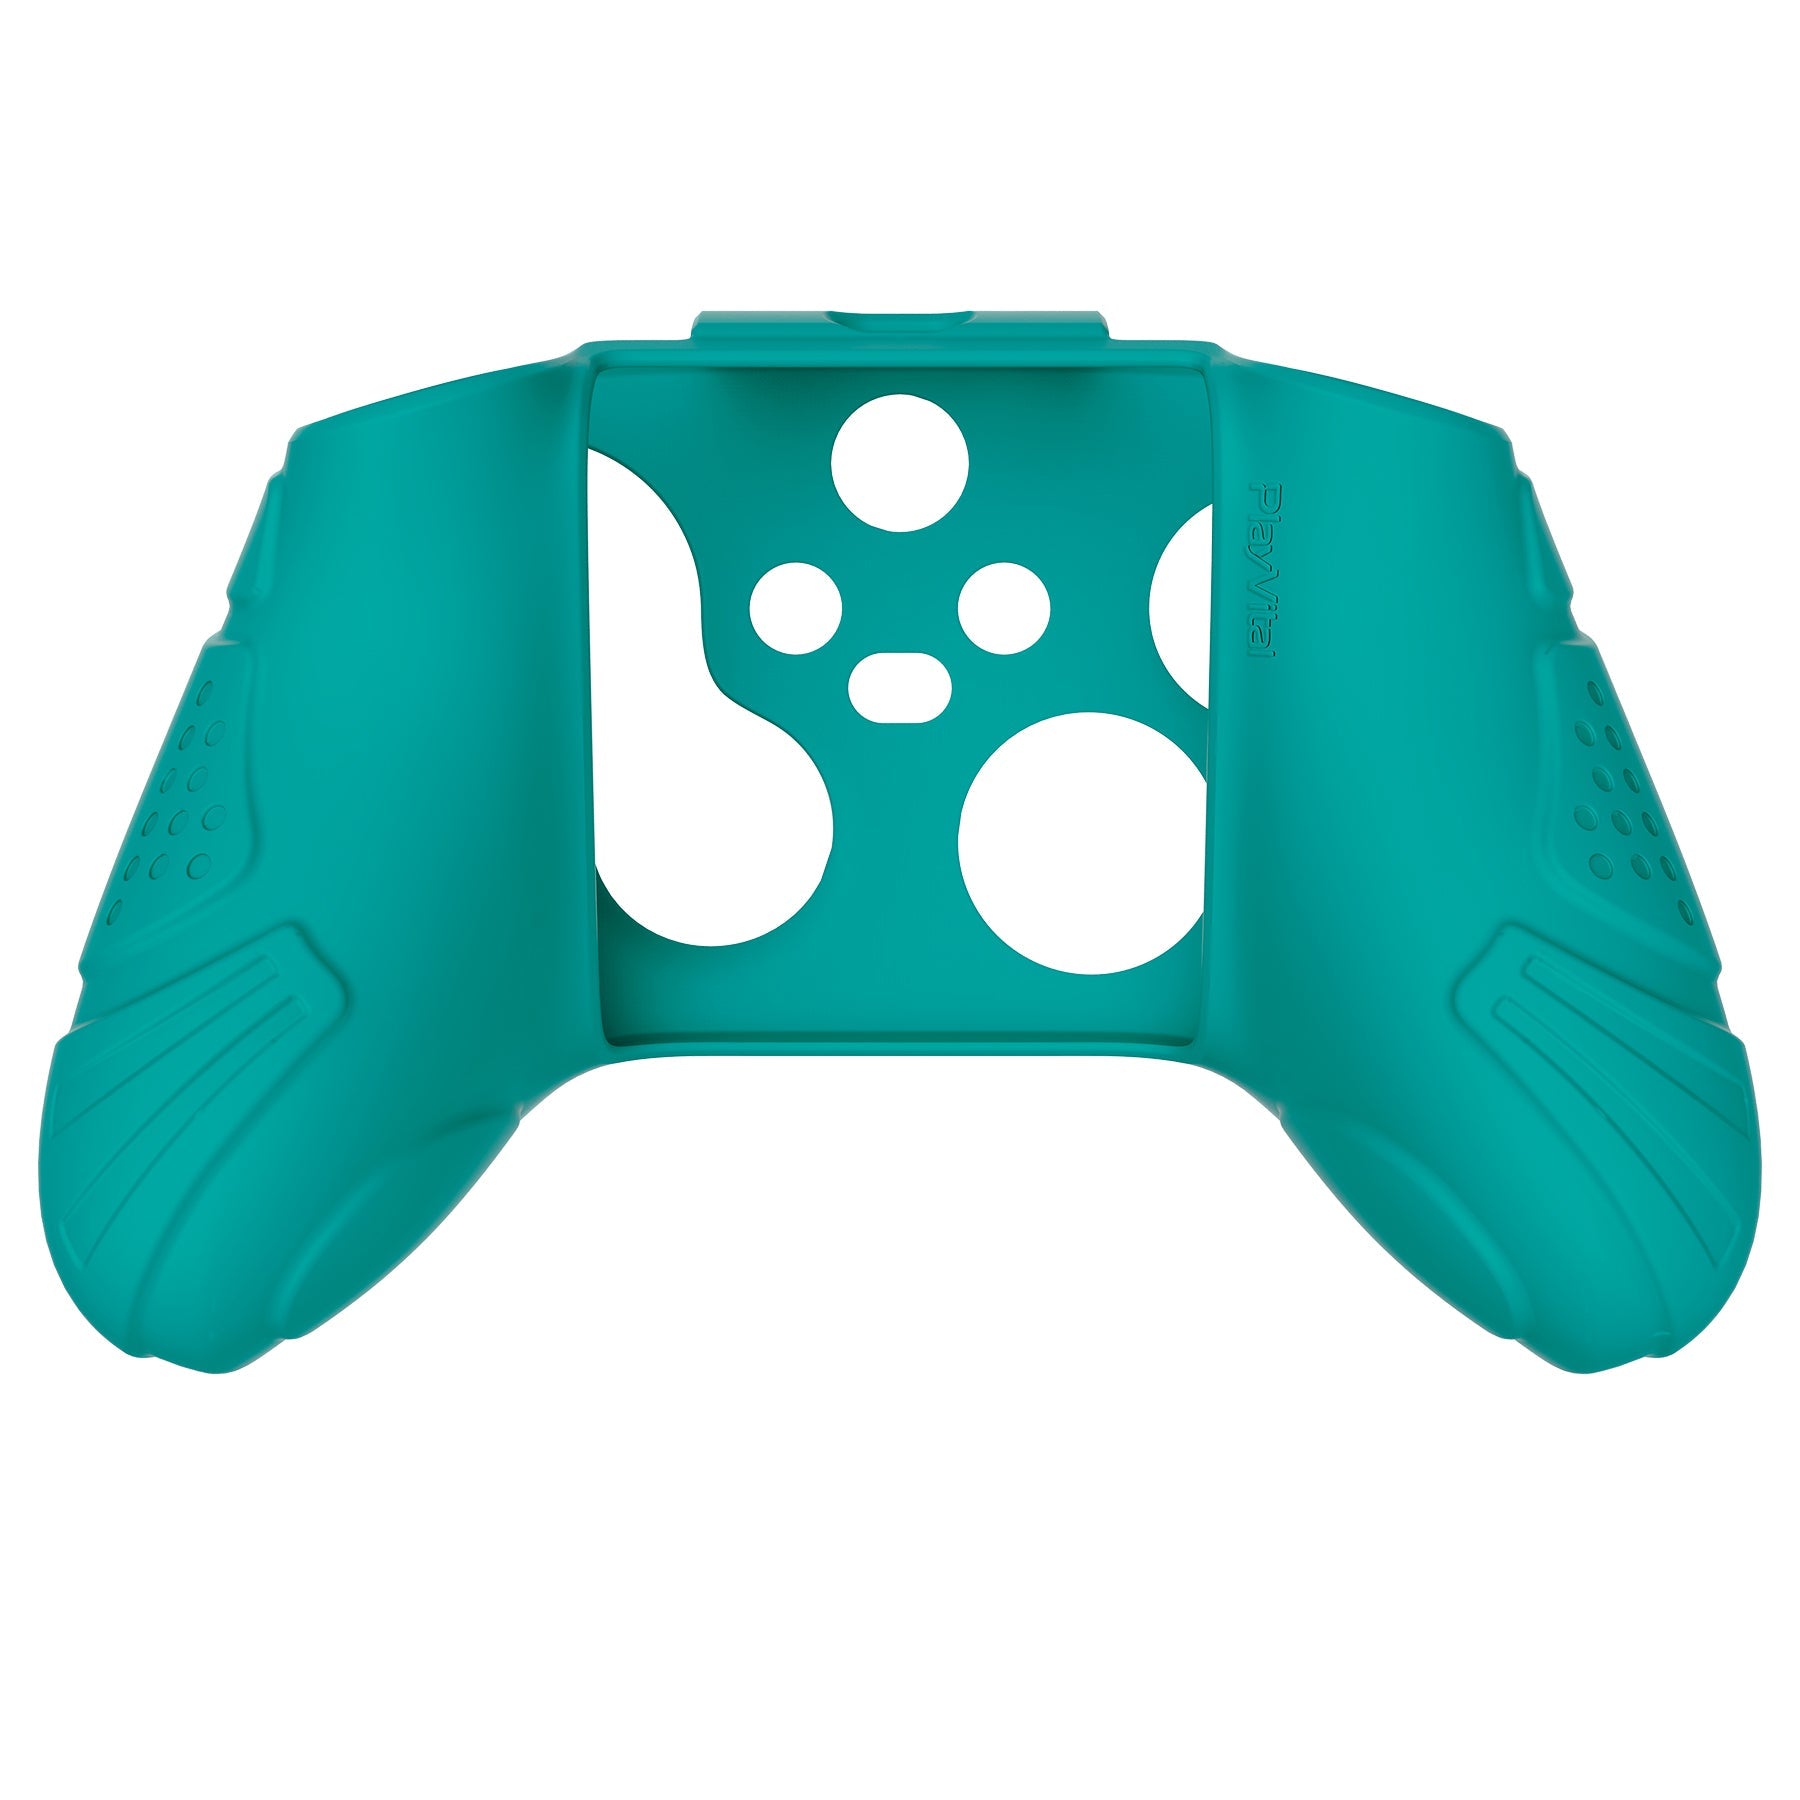 PlayVital Guardian Edition Aqua Green Ergonomic Soft Anti-slip Controller Silicone Case Cover, Rubber Protector Skins with Black Joystick Caps for Xbox Series S and Xbox Series X Controller - HCX3010 PlayVital